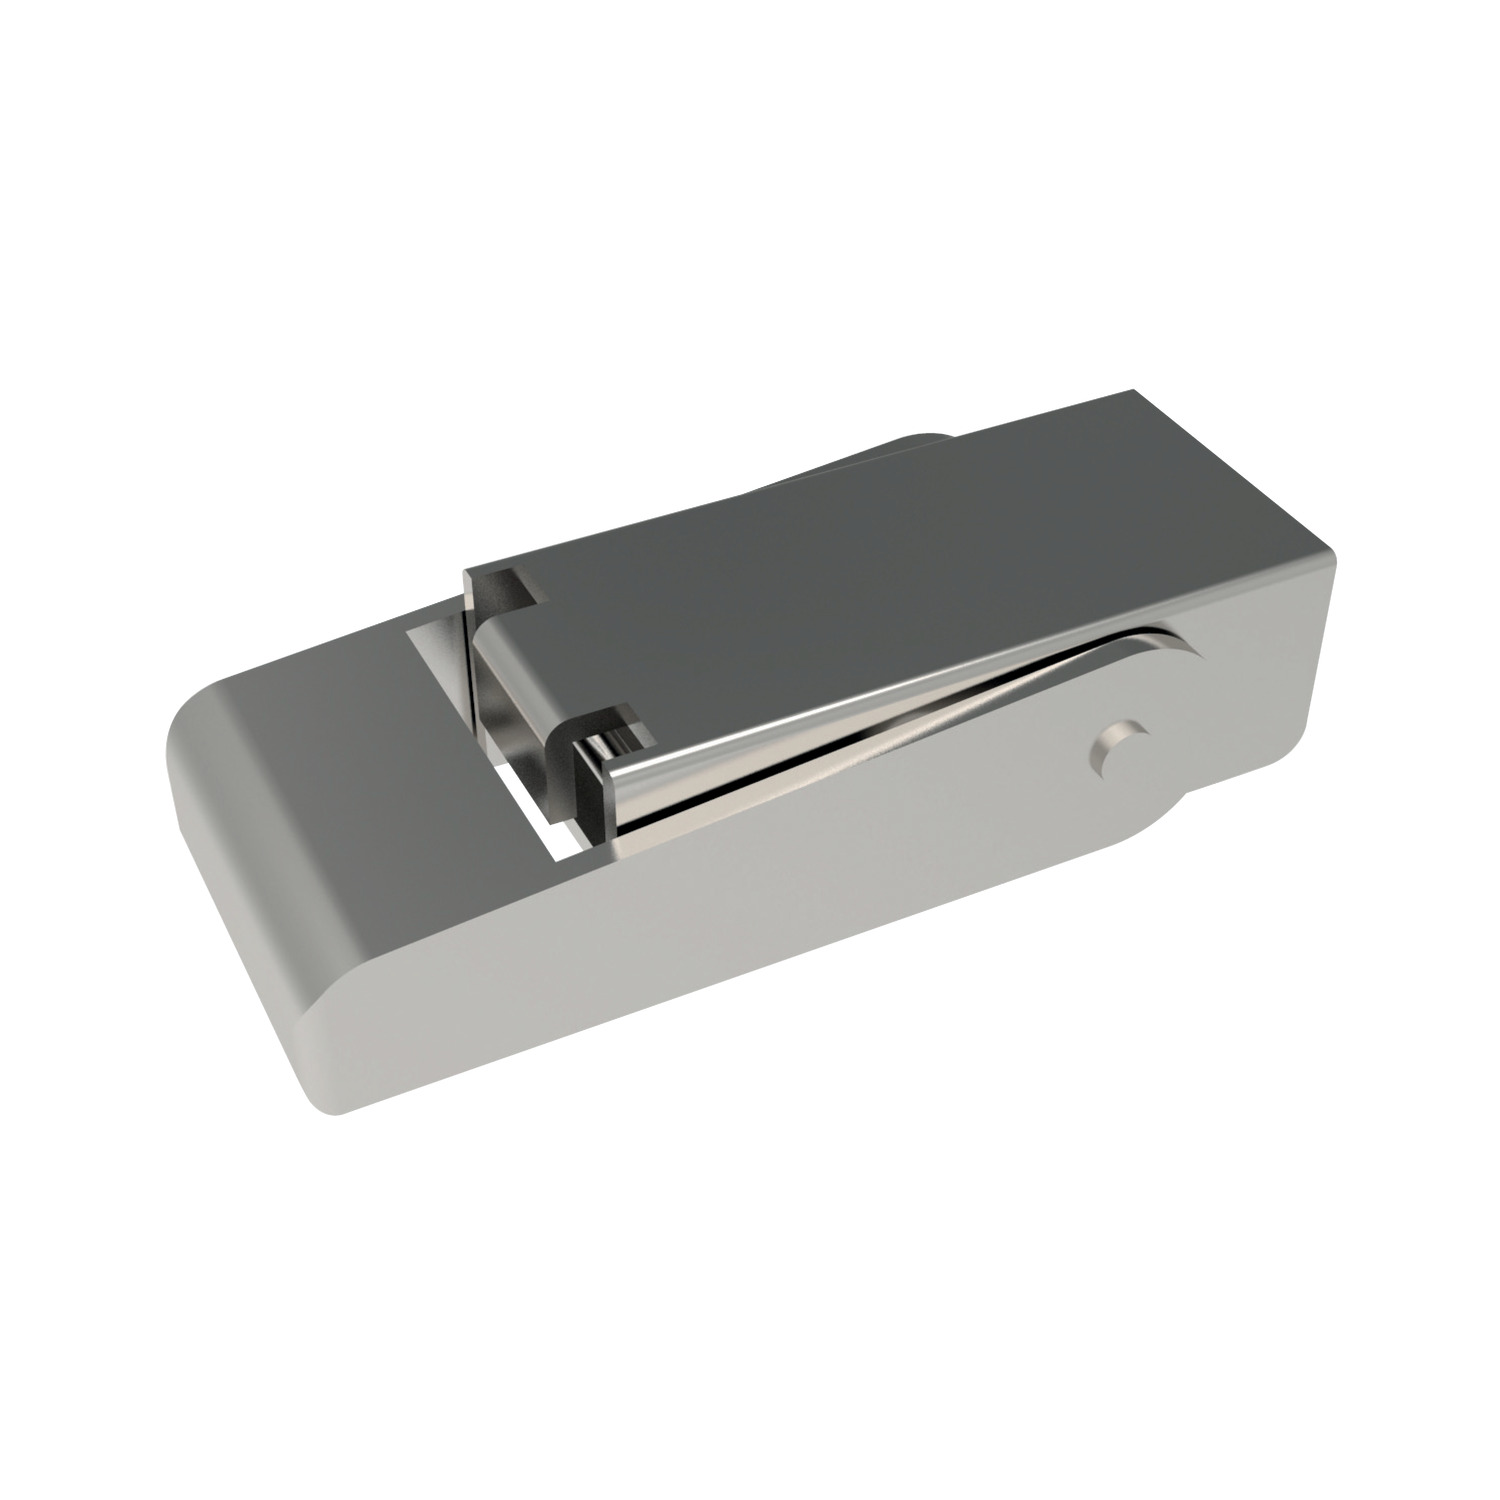 J0360.AC0030 Draw Latches Stainless Steel 